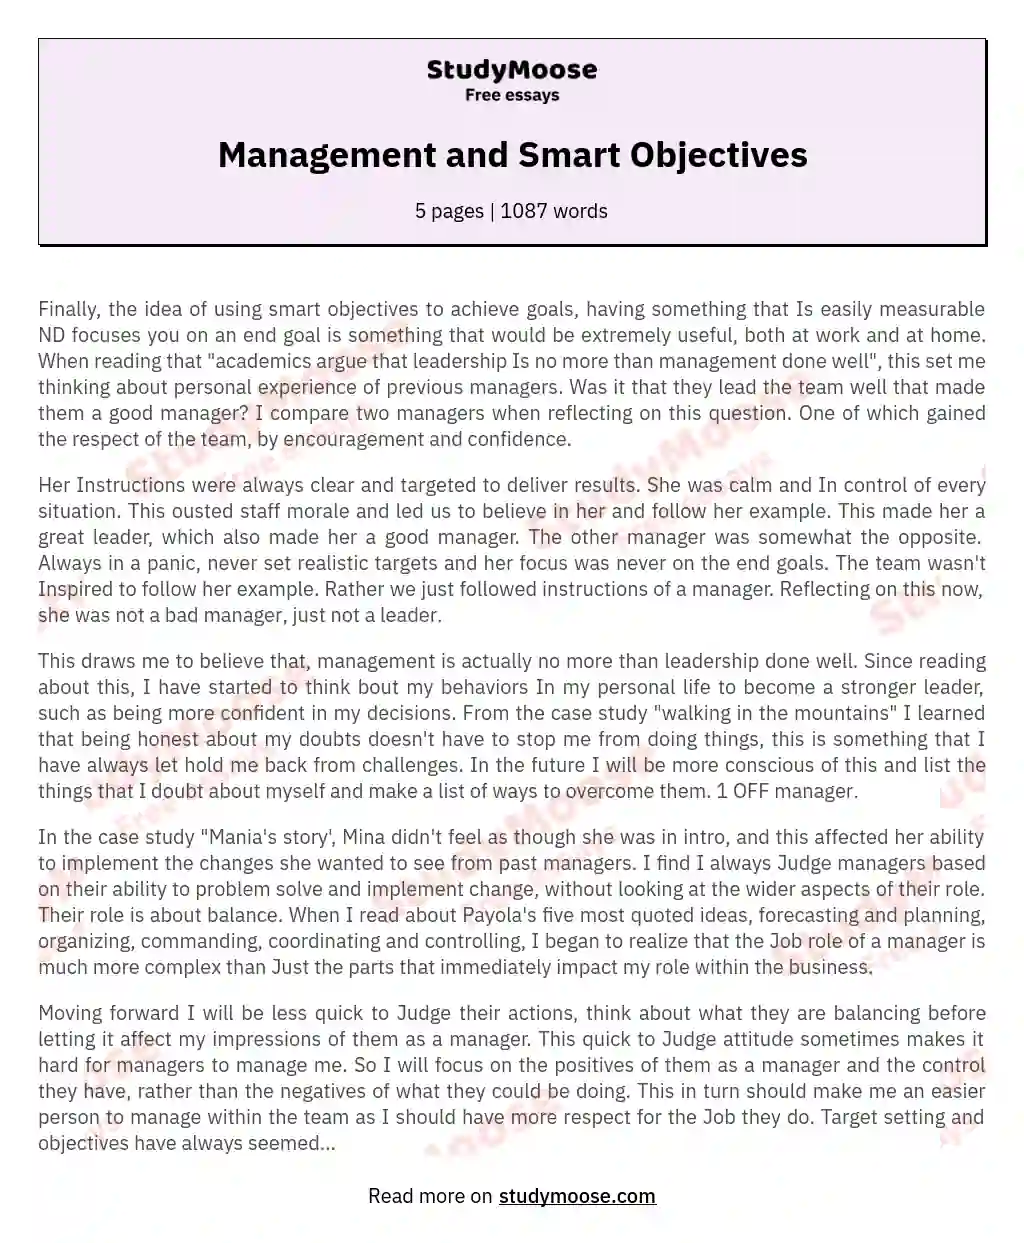 Management and Smart Objectives essay